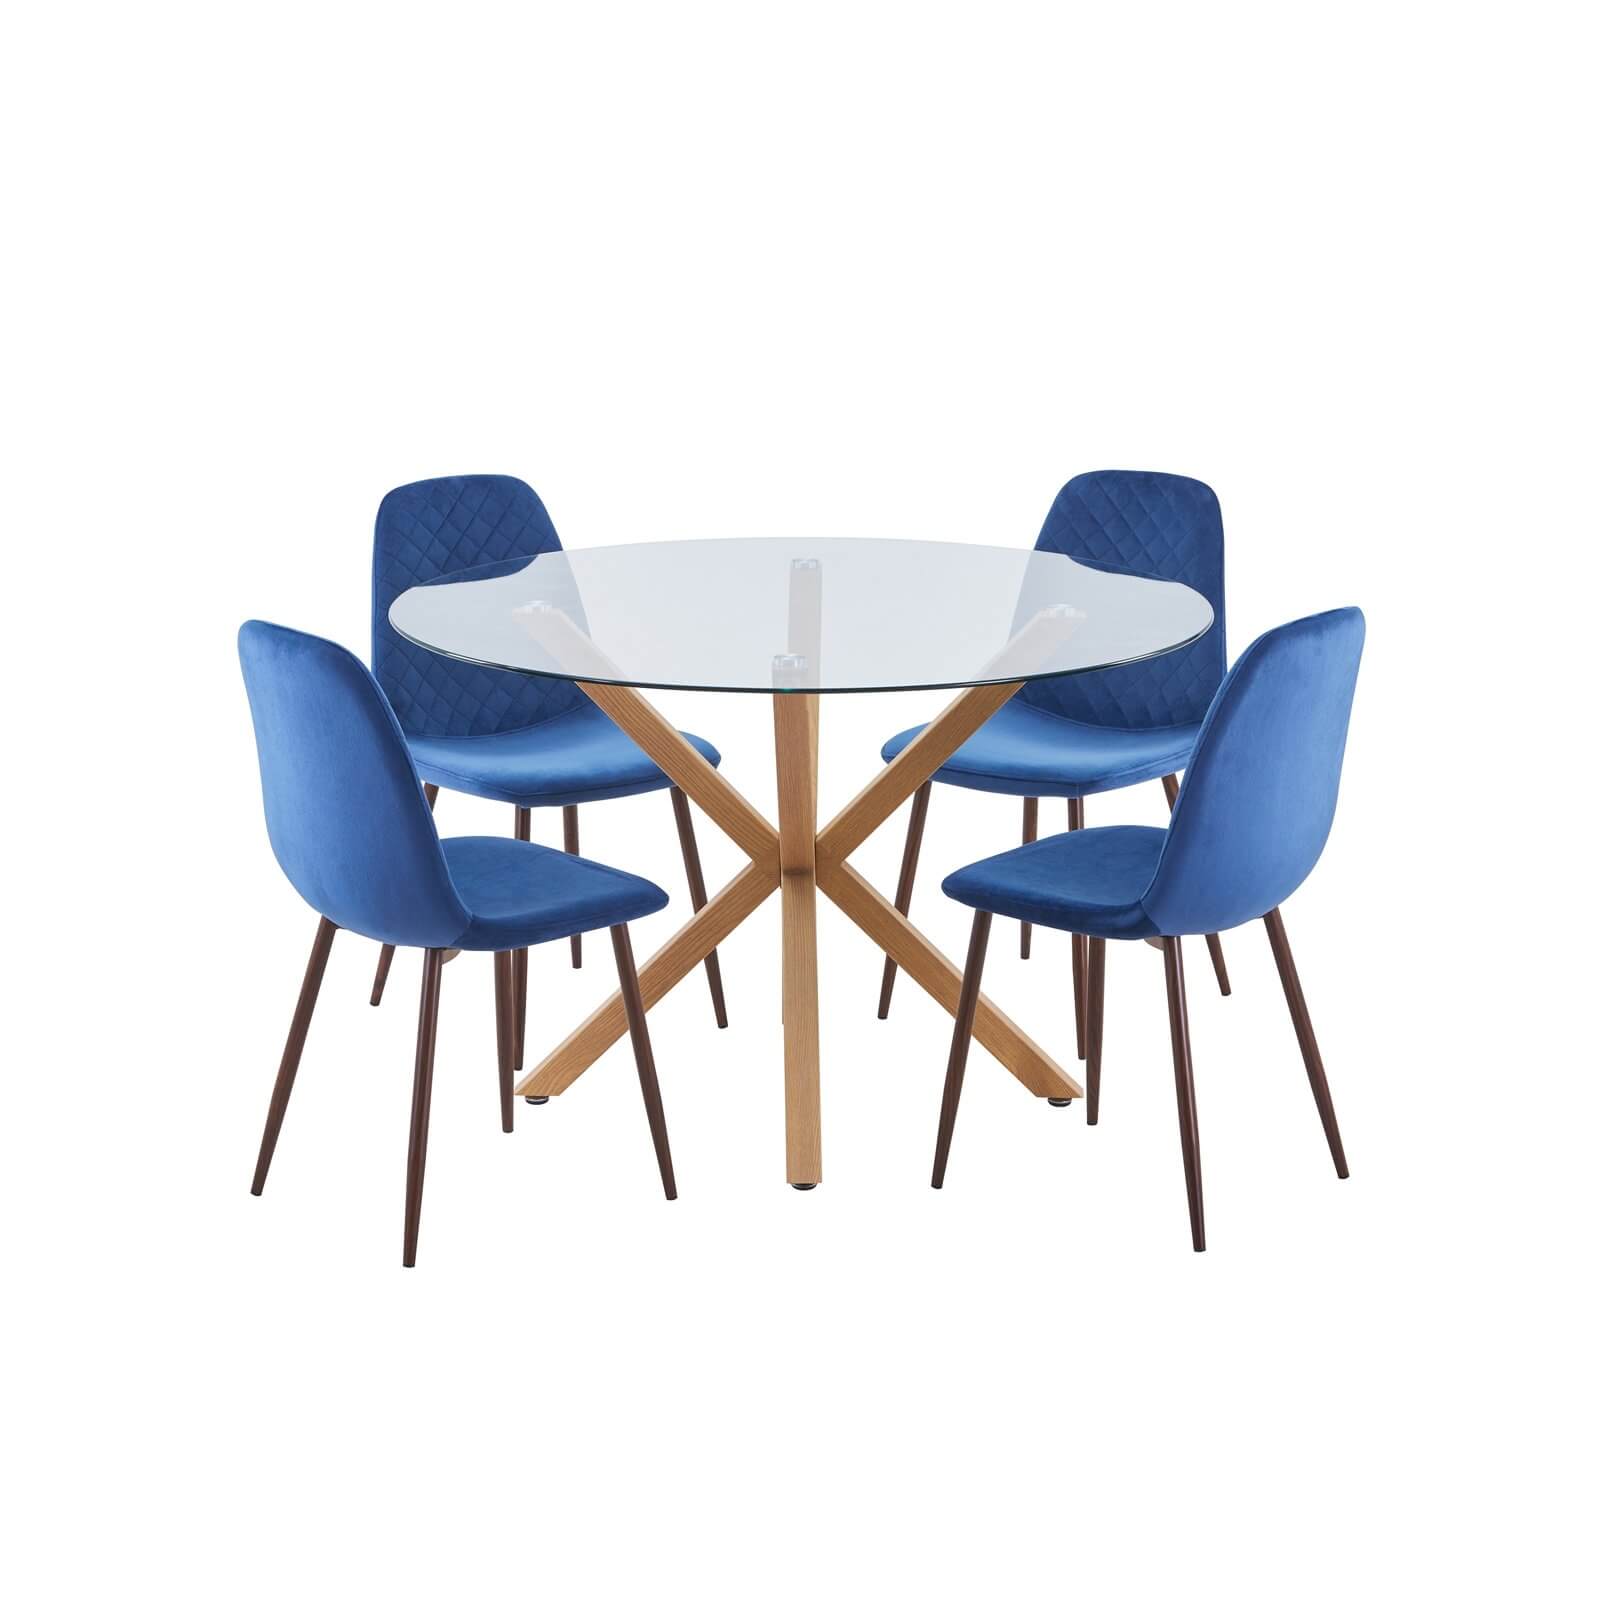 Ludlow Round Dining Table and 4 Perth Chairs - Navy